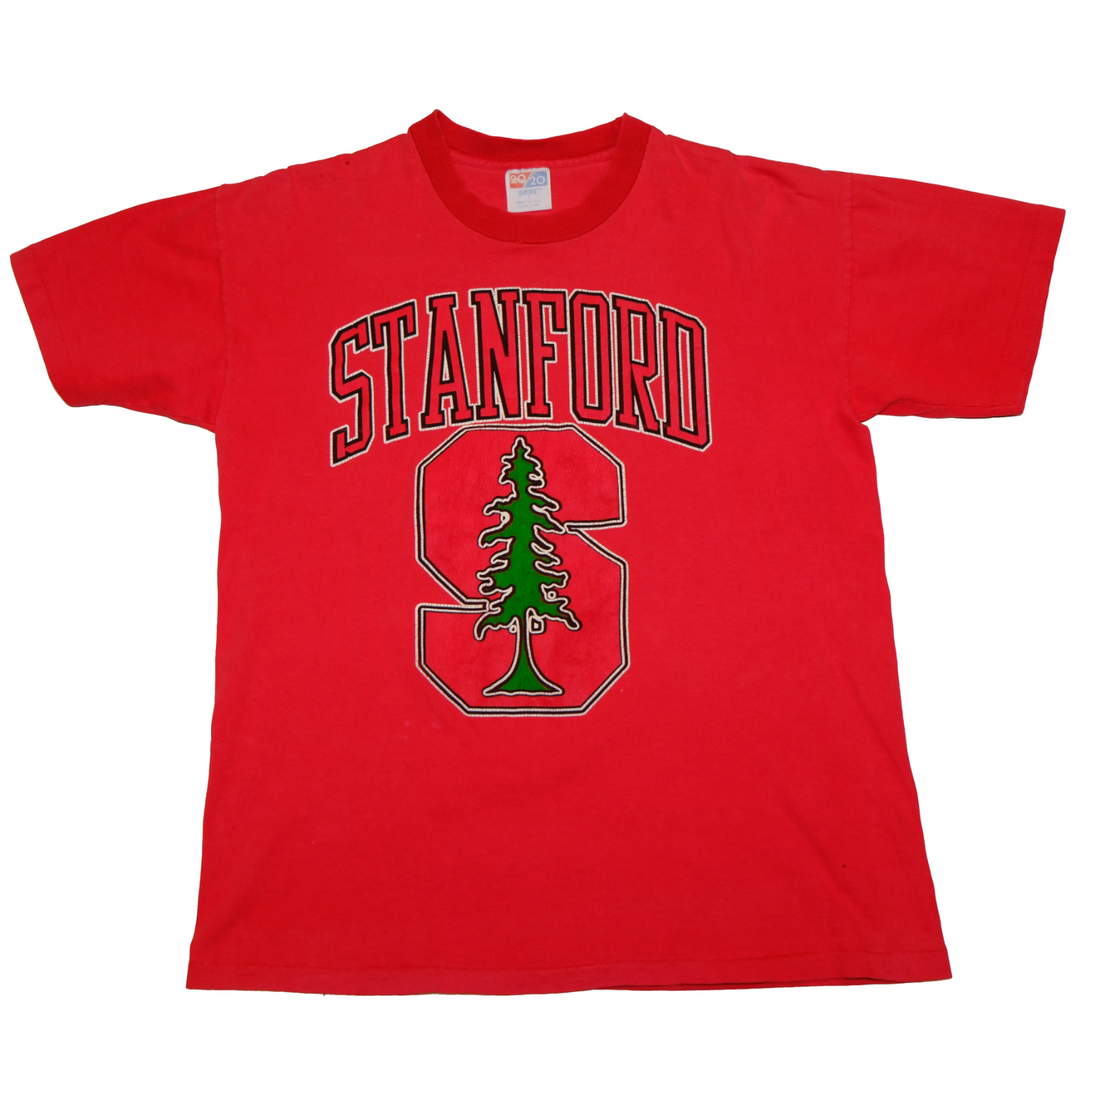 Vintage Stanford Cardinals T-Shirt Size Large Red 90s NCAA